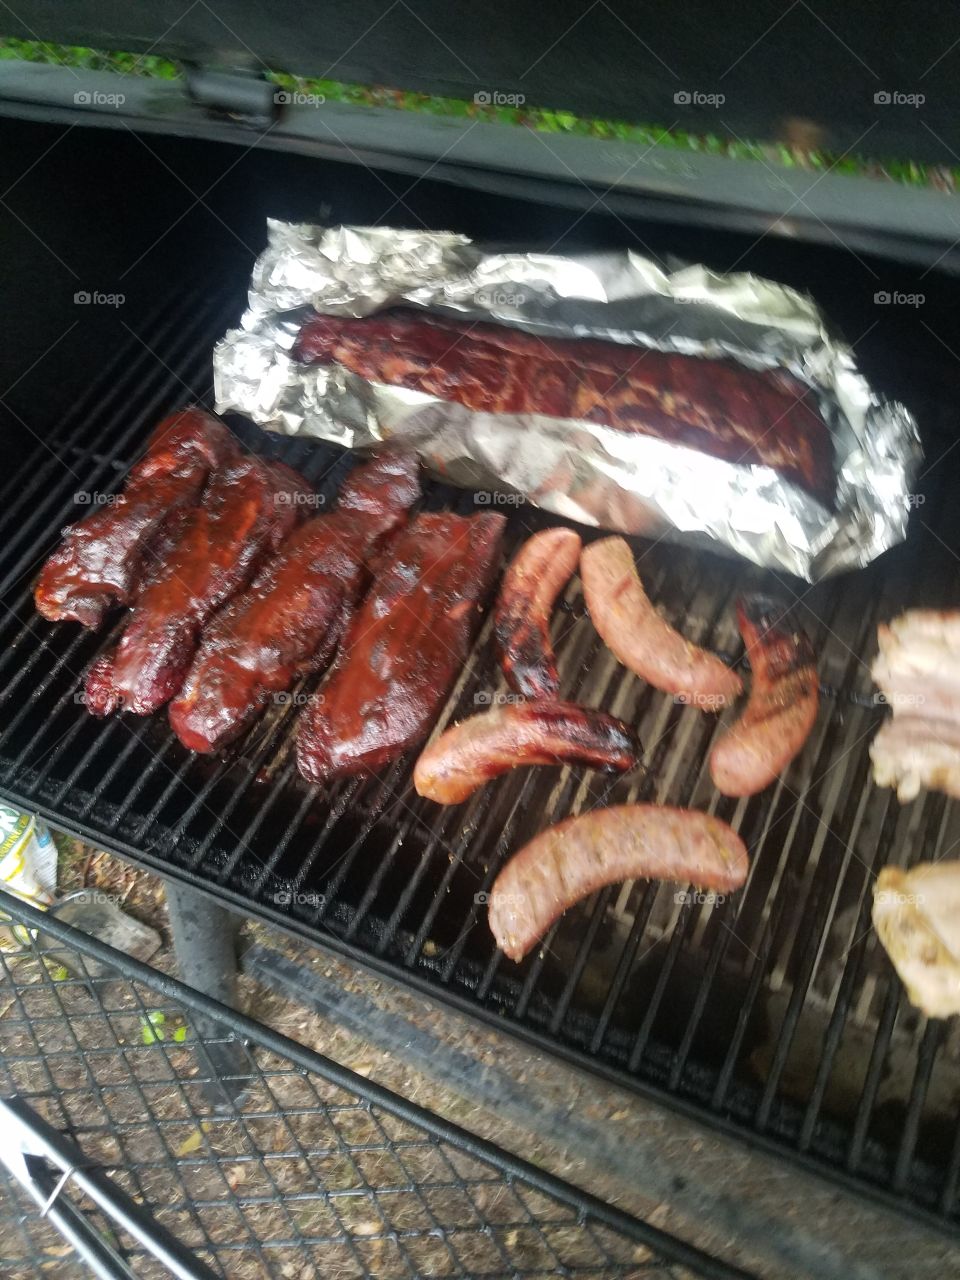 Smoking ribs and sausages together